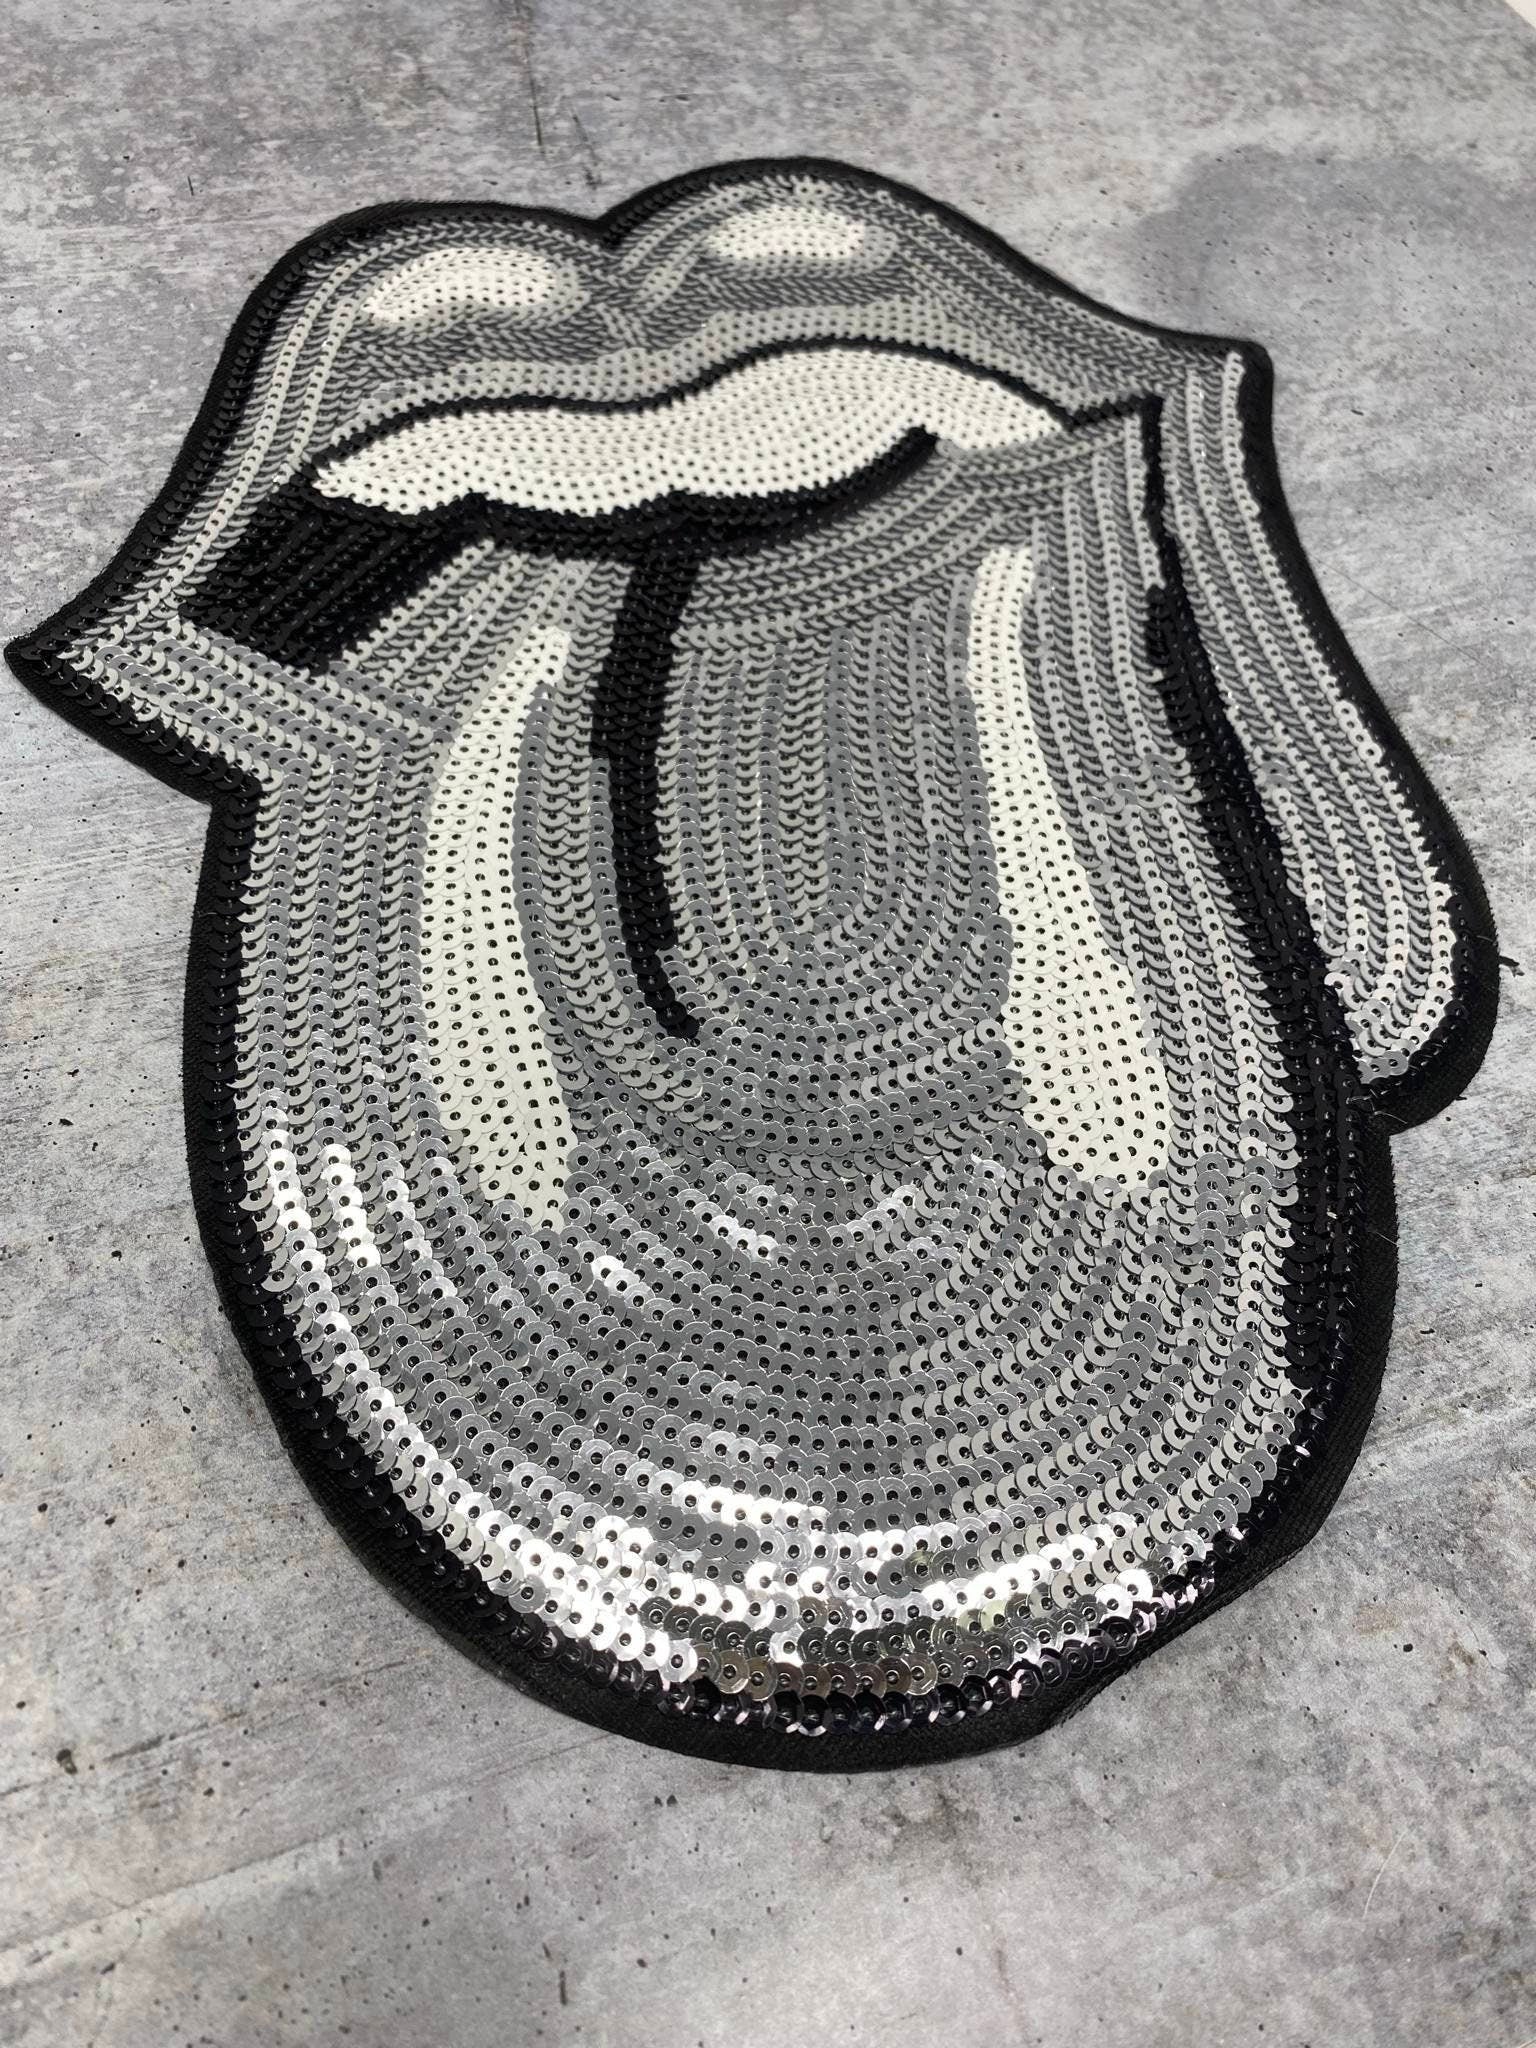 Sparkling "Silver" Sequins KISS Lips and Tongue Patch (iron-on) Size 13", LARGE Bling Patch for Denim Jacket, Shirts, Hoodies, and More